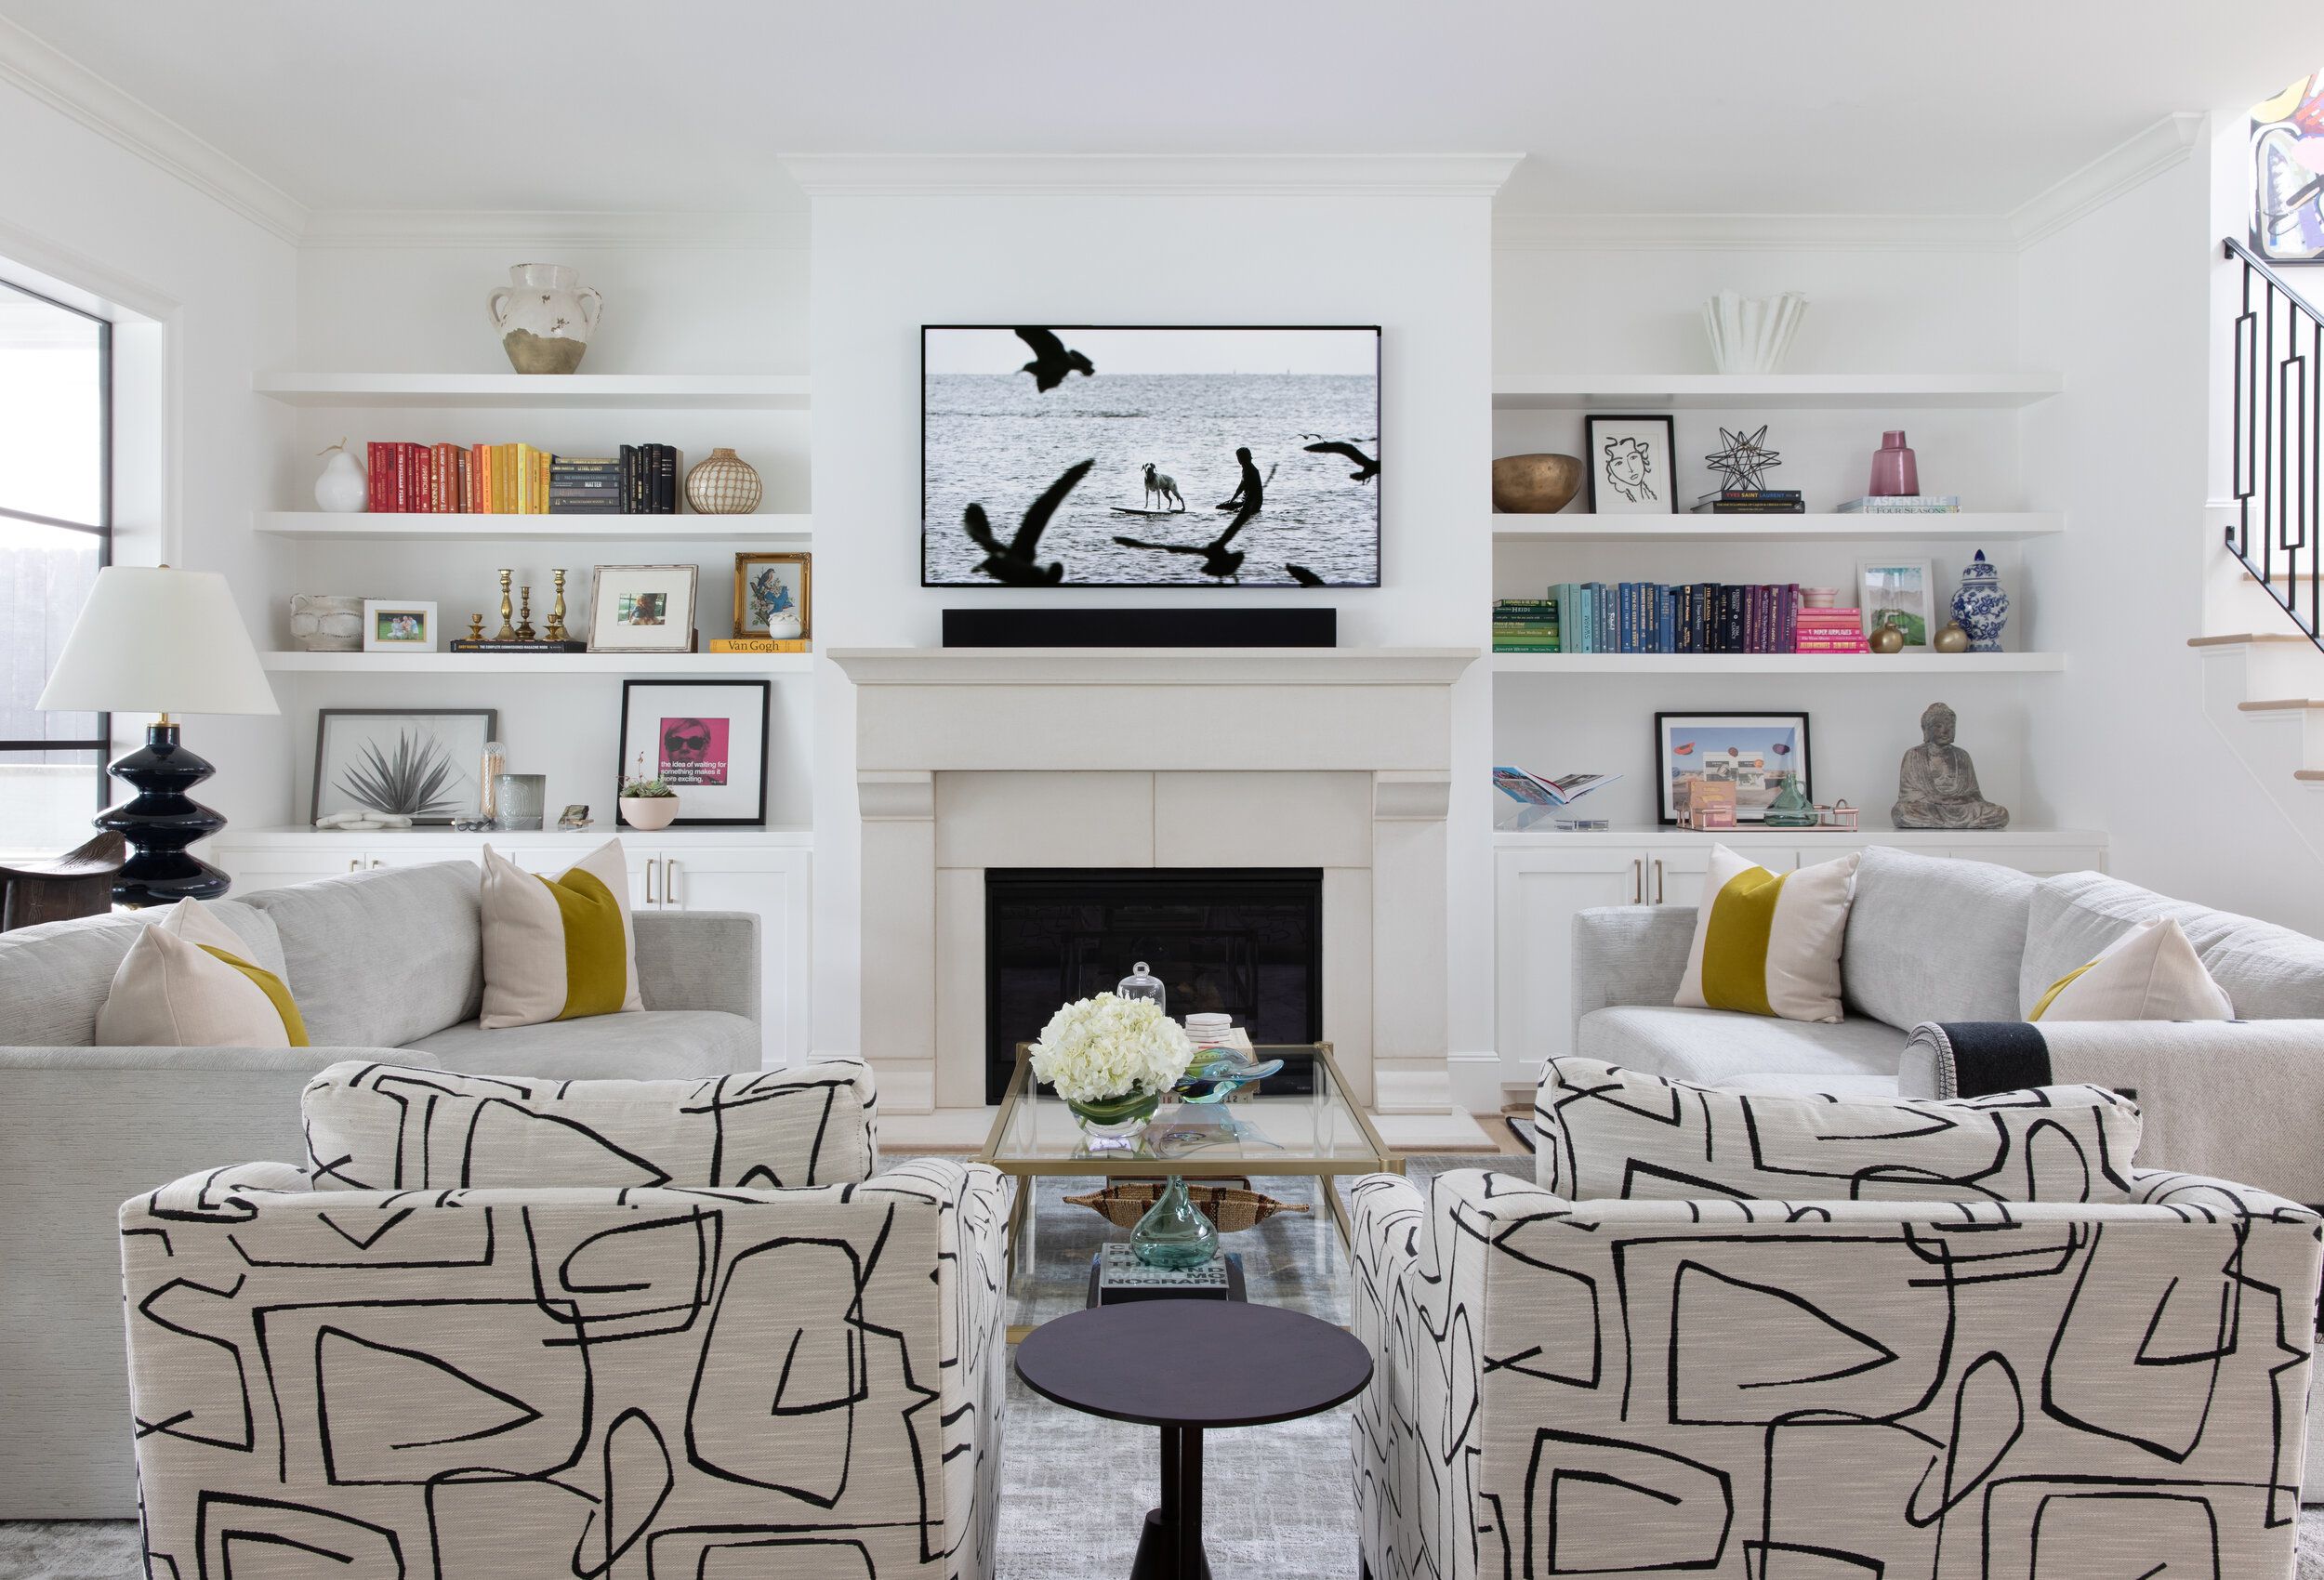 These Beautiful Living Rooms Will Make You Want Built-in Shelving